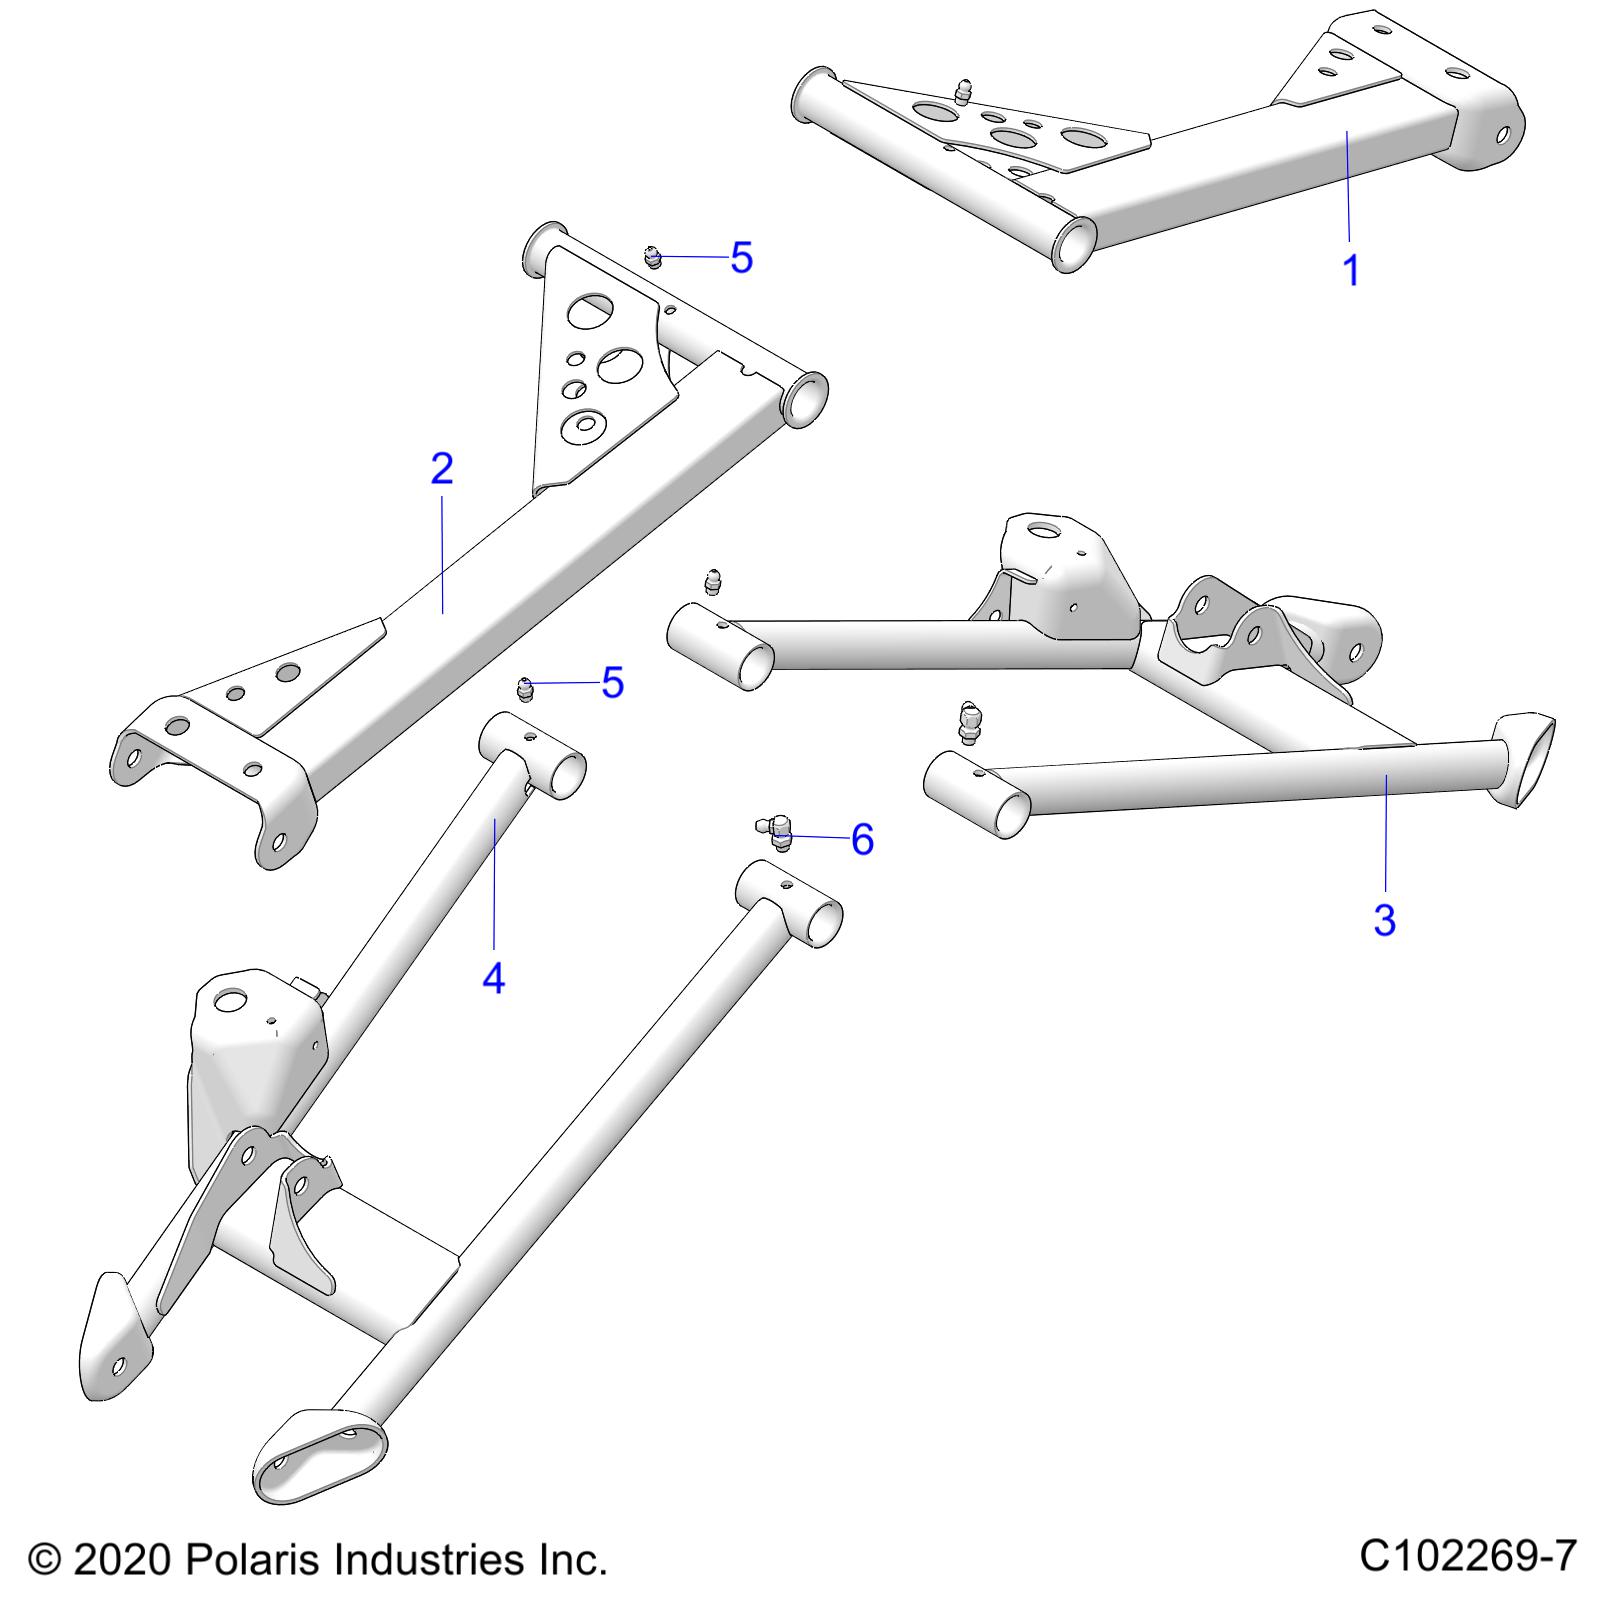 Part Number : 1017217-293 CONTROL ARM WELD REAR UPR RIGH